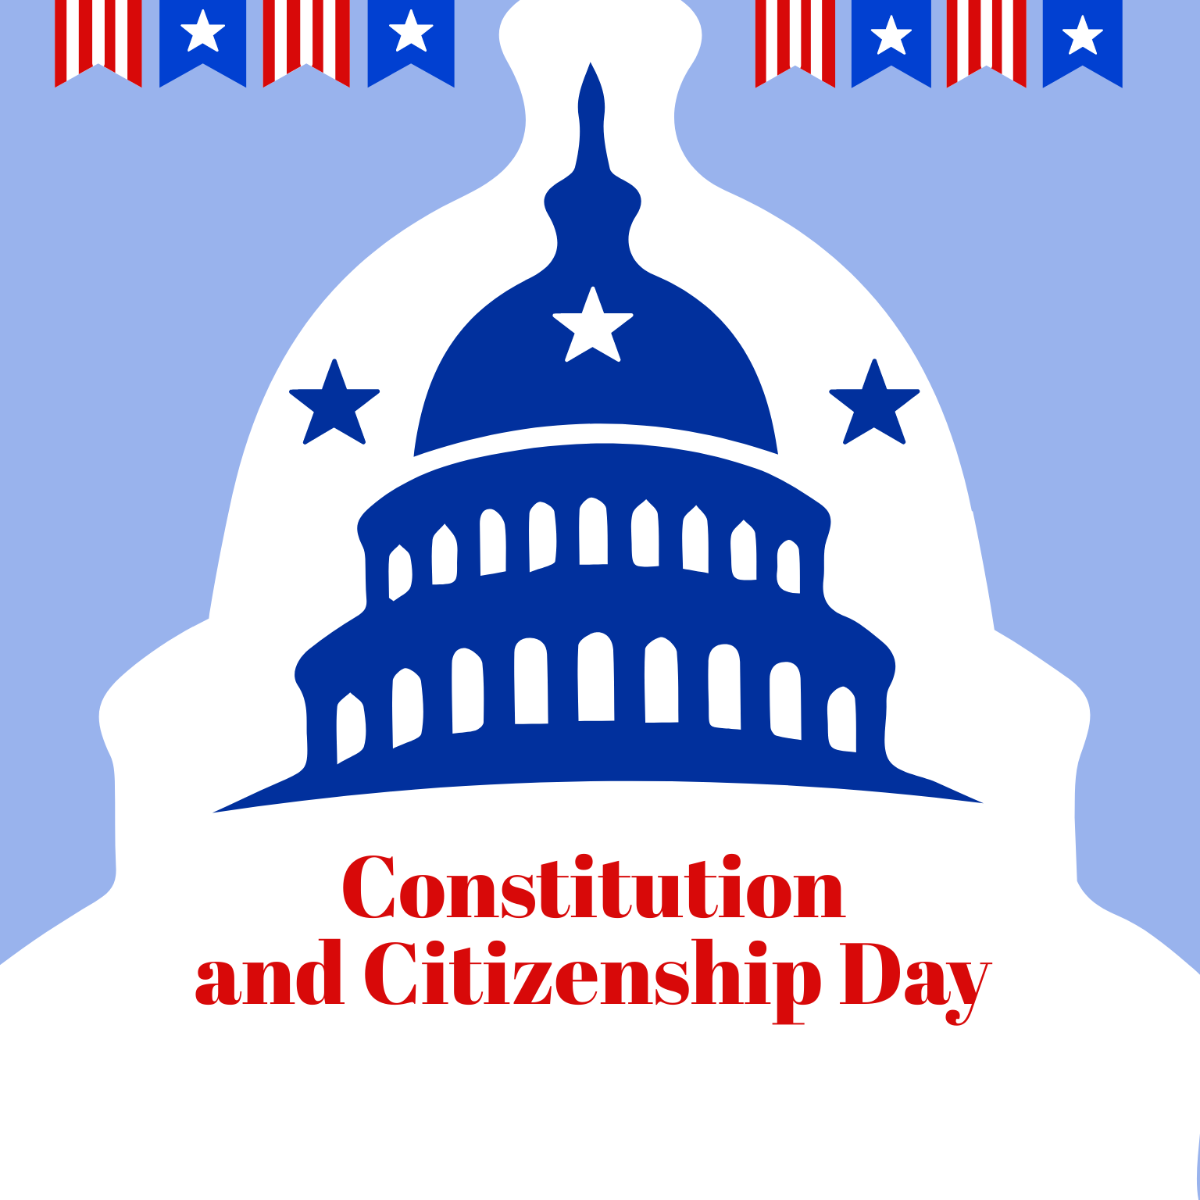 Constitution and Citizenship Day Illustration Template